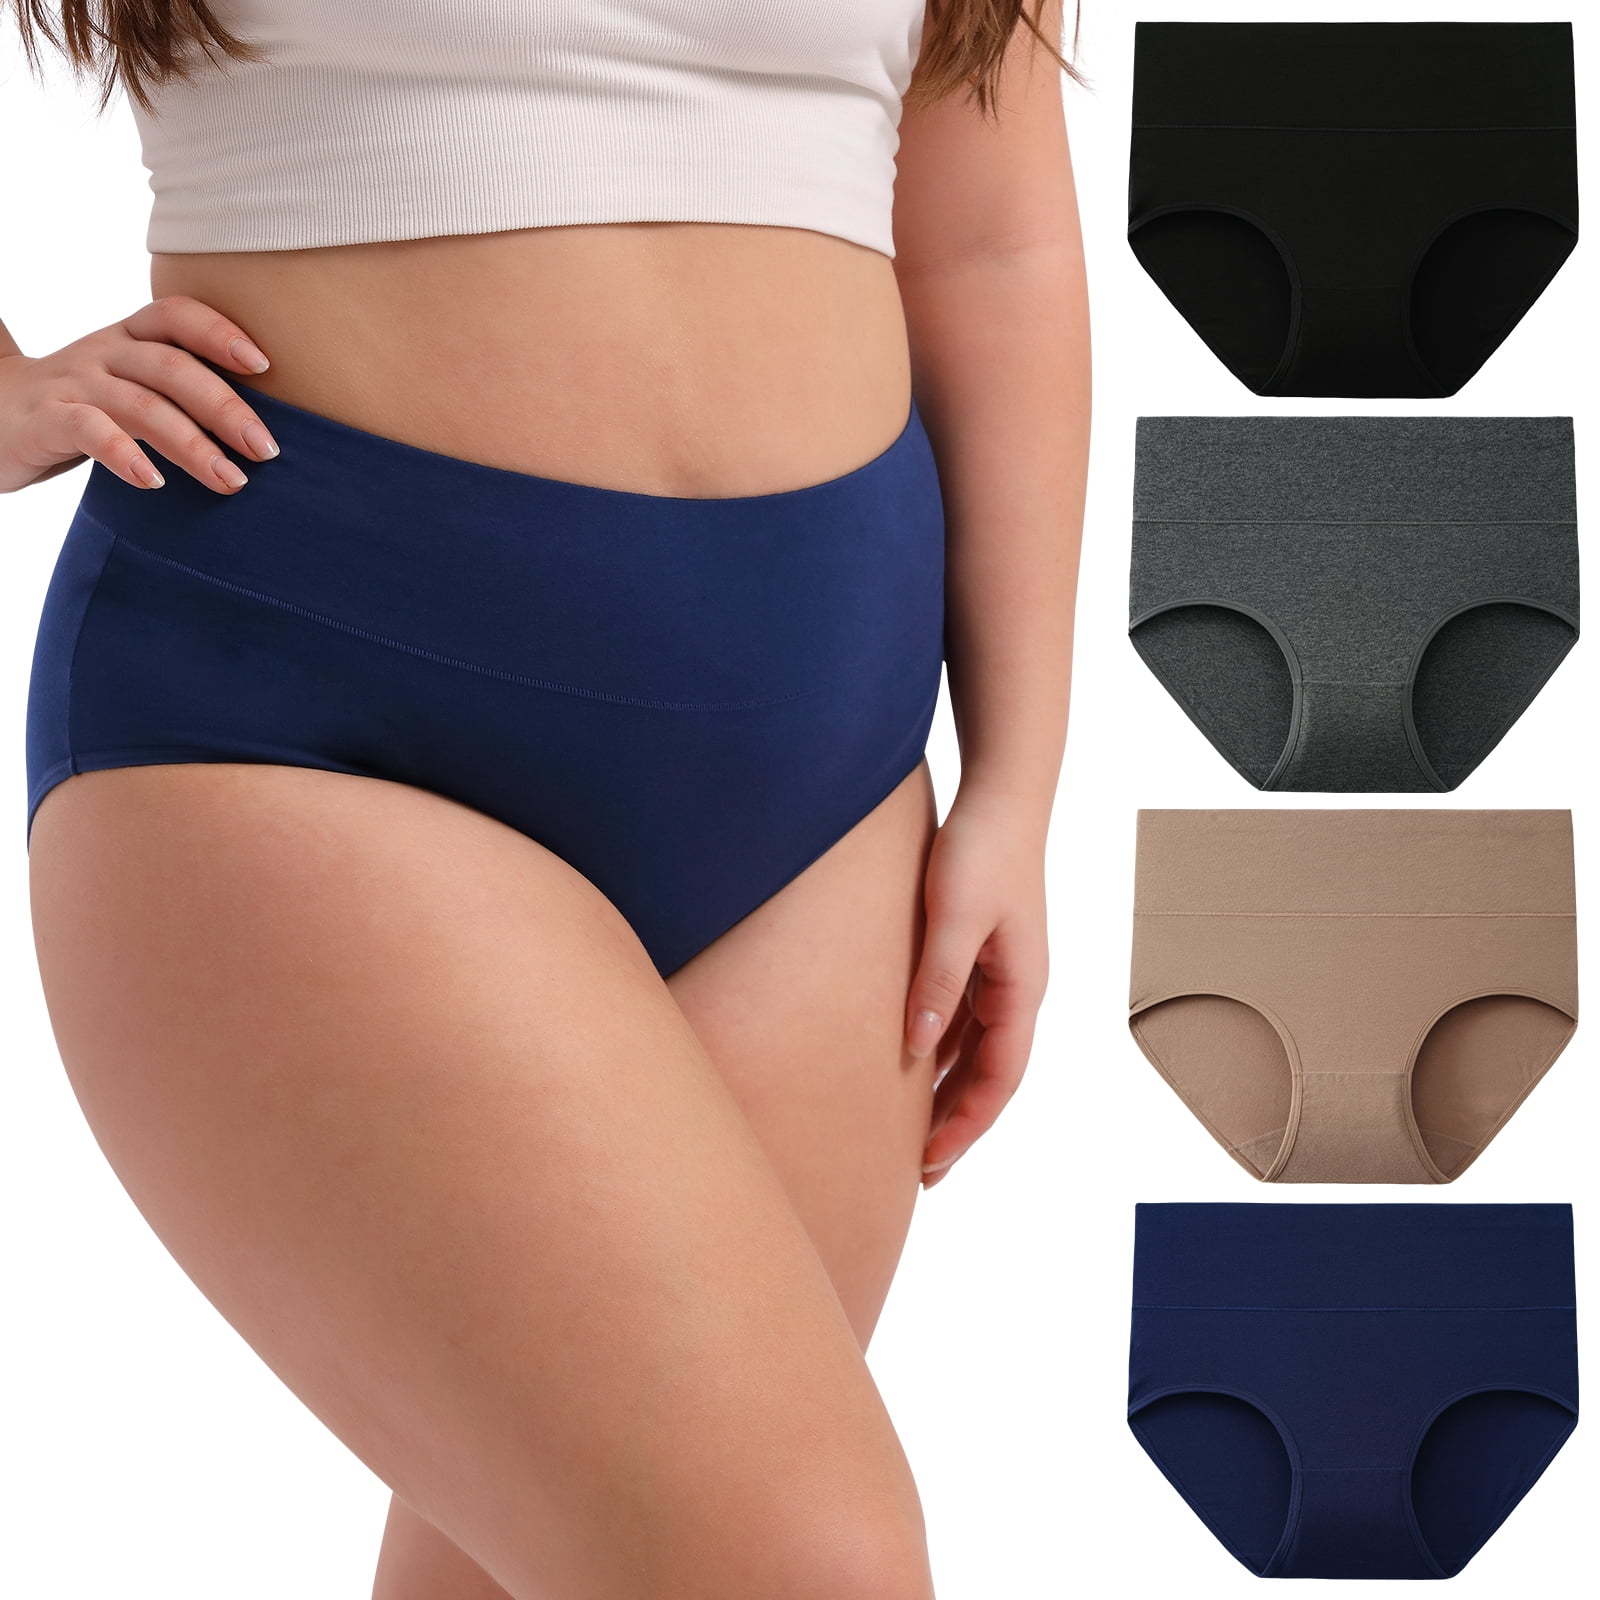  INNERSY Womens Plus Size XL-5XL Cotton Underwear High  Waisted Briefs Panties 4-Pack